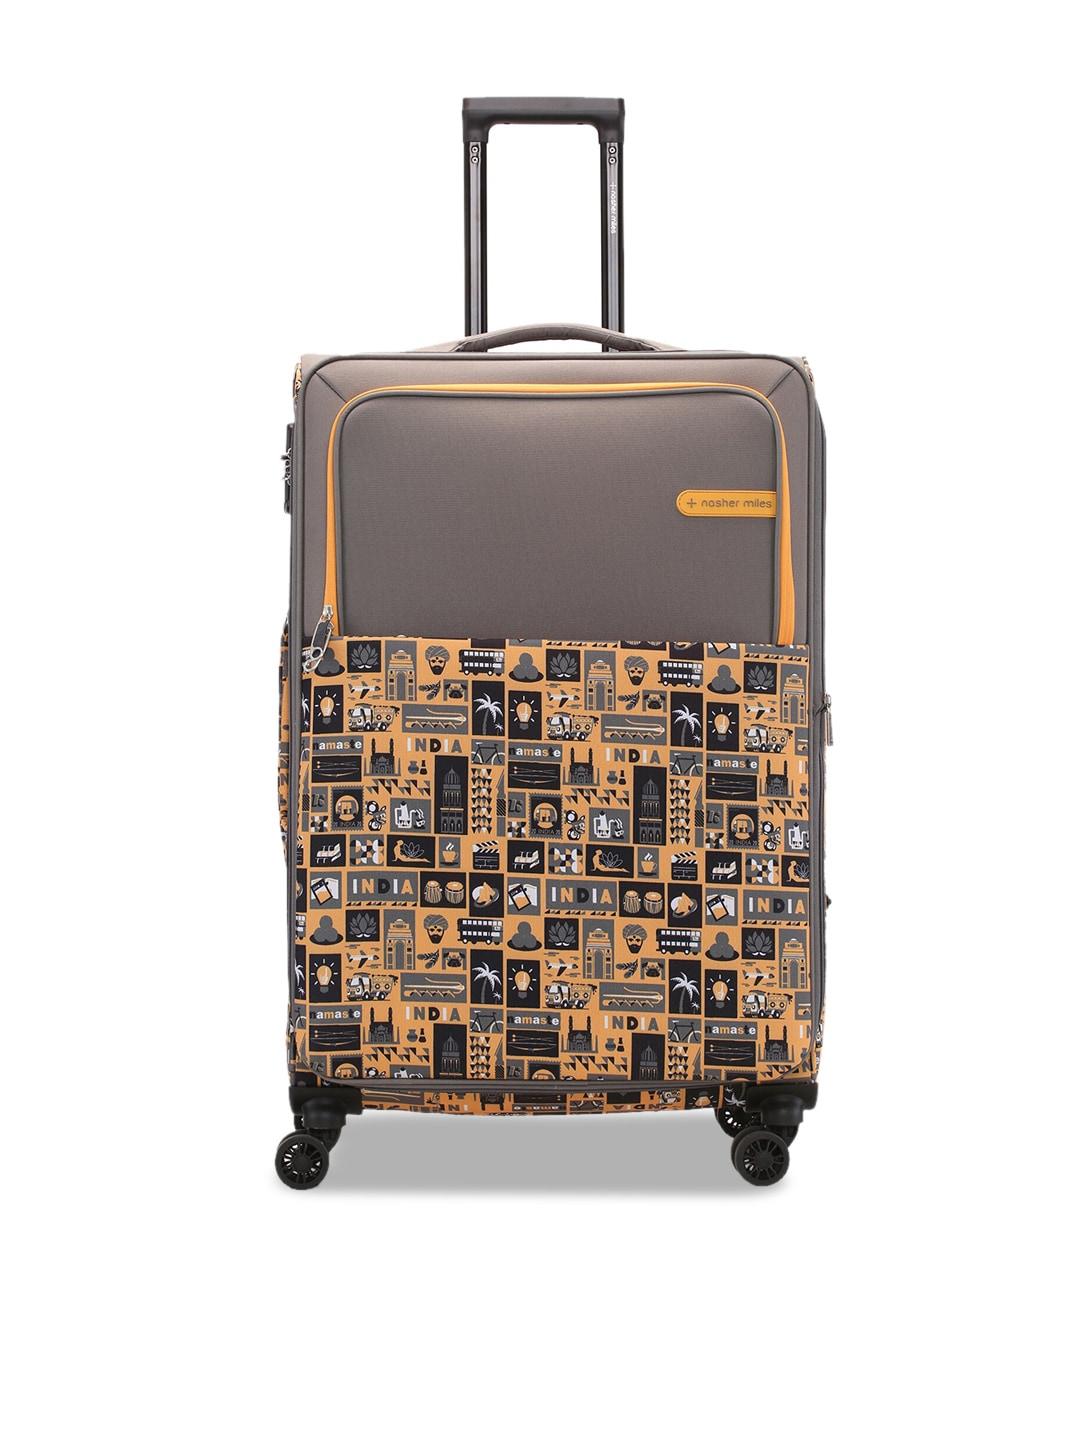 nasher miles printed soft-sided trolley suitcase